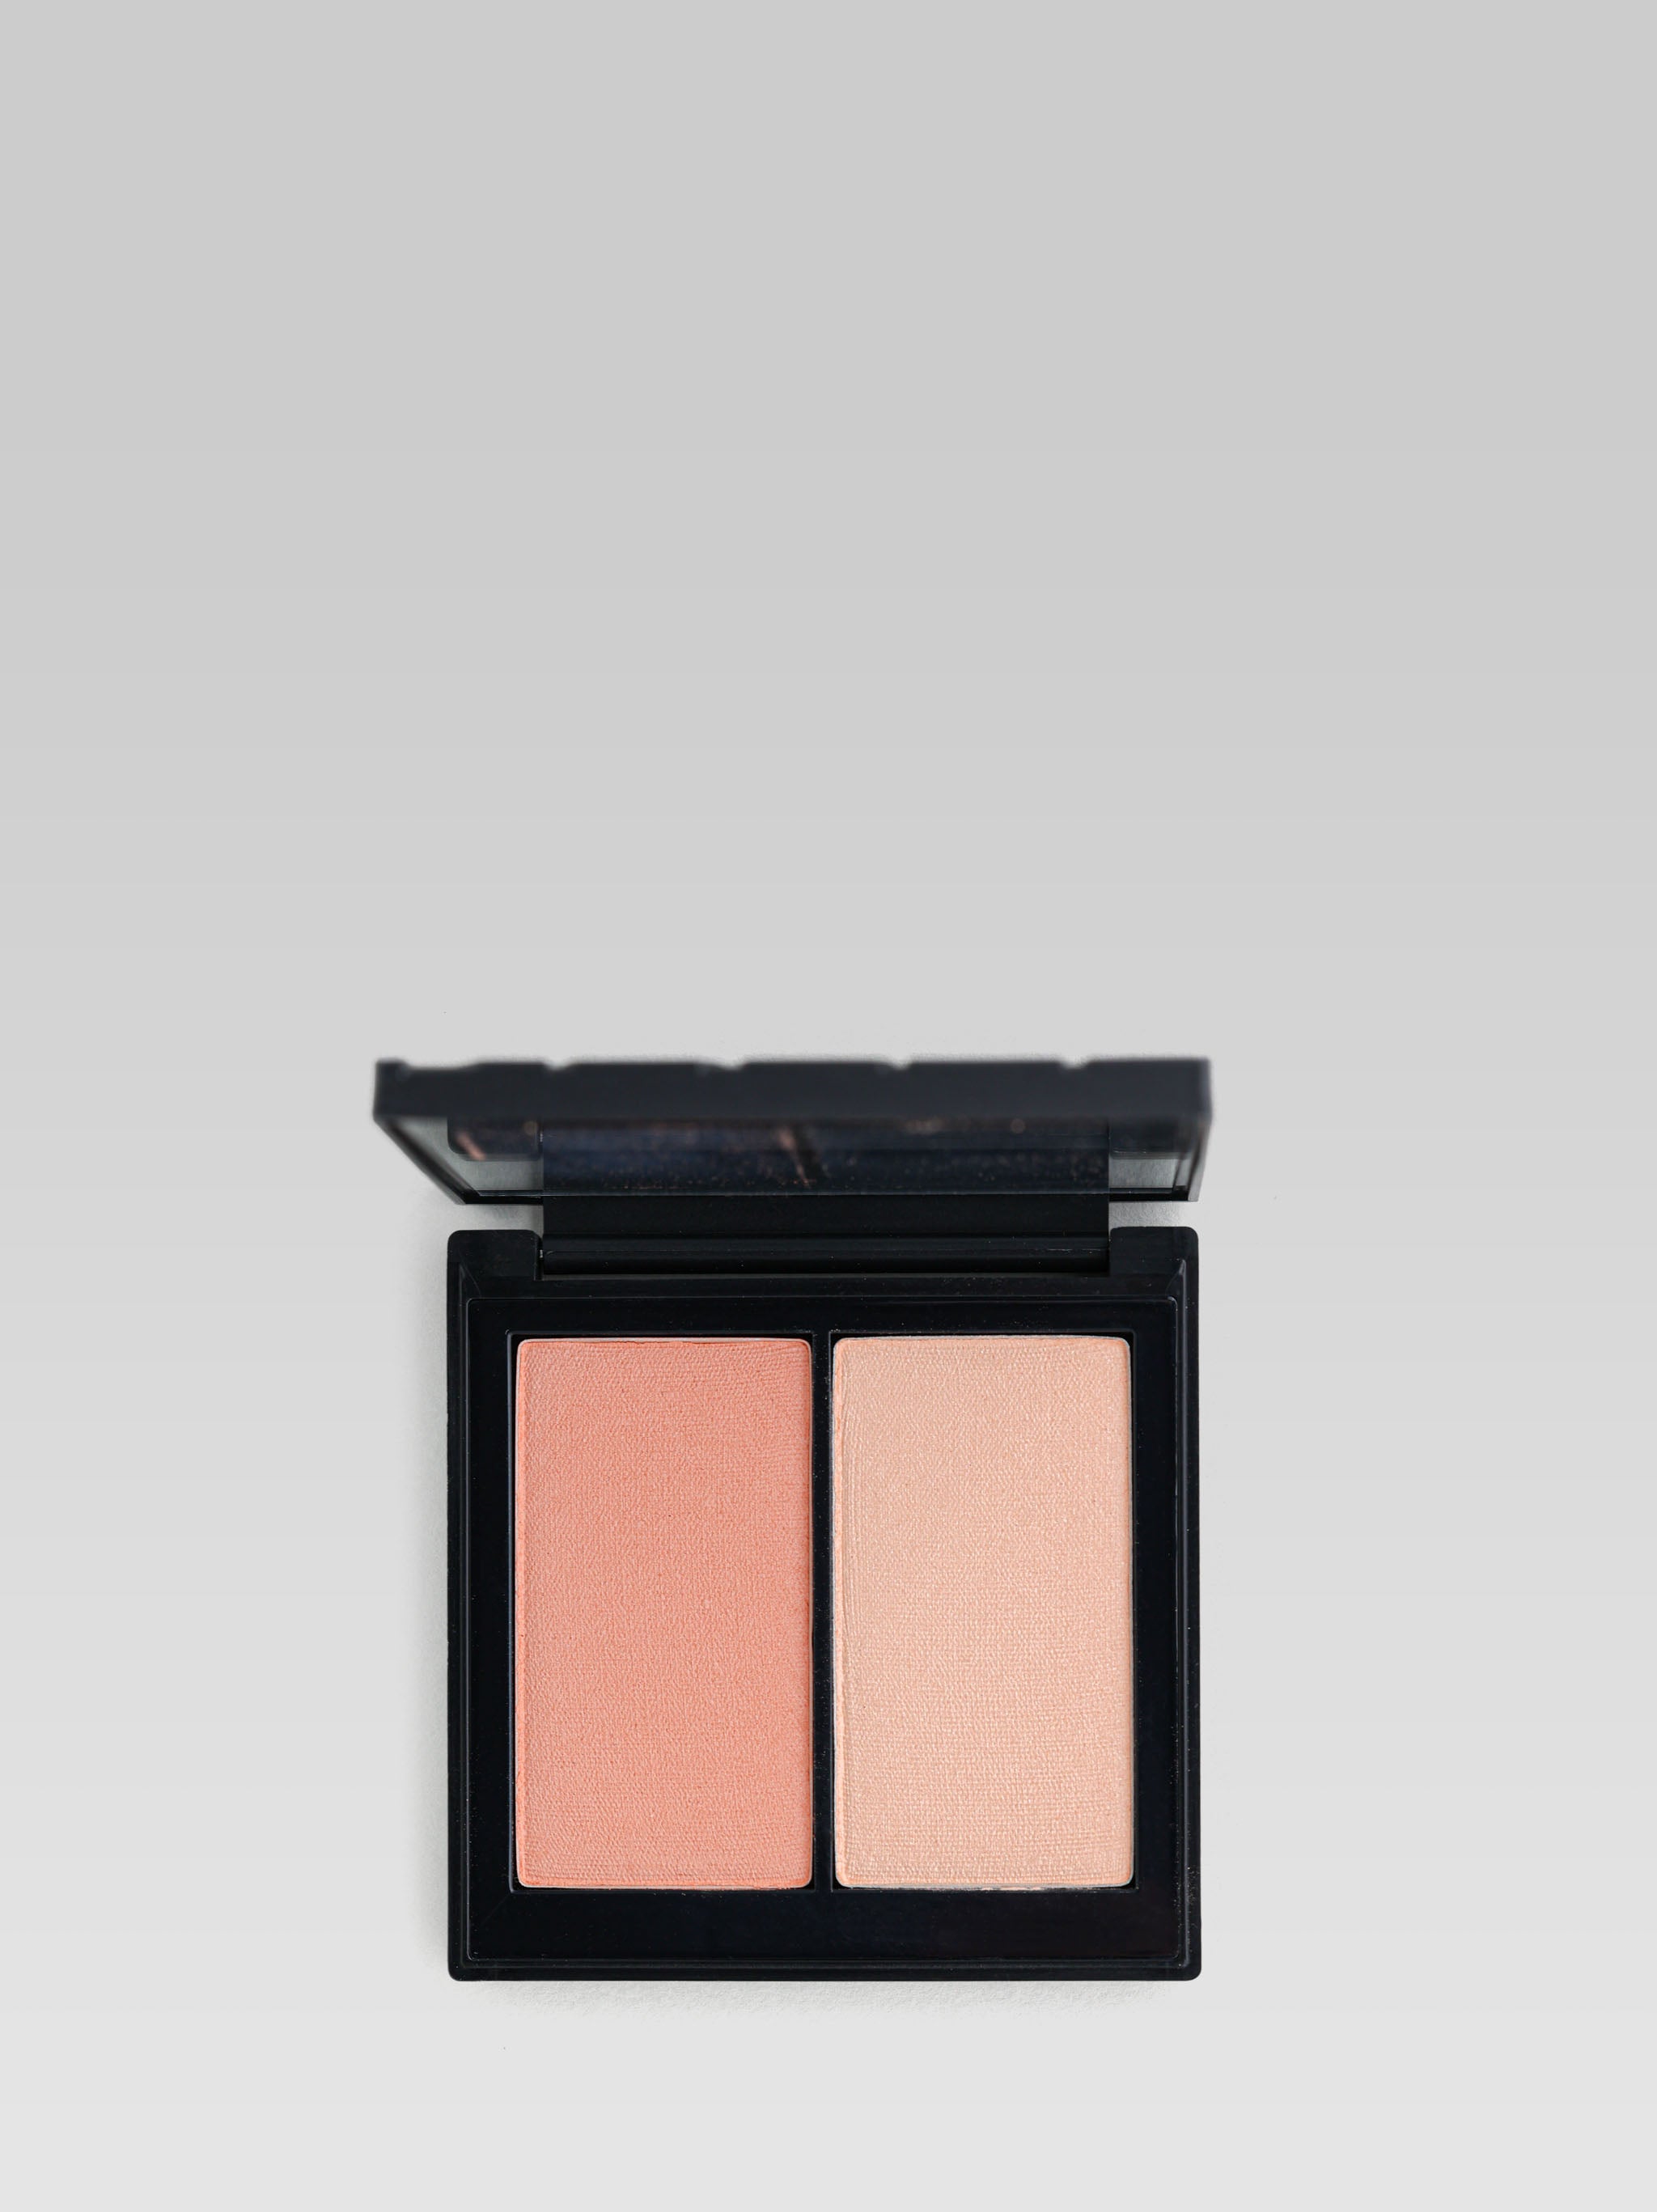 KOSAS Color and Light Palette Cream Blush and Highlighter in Papaya 1072 product shot